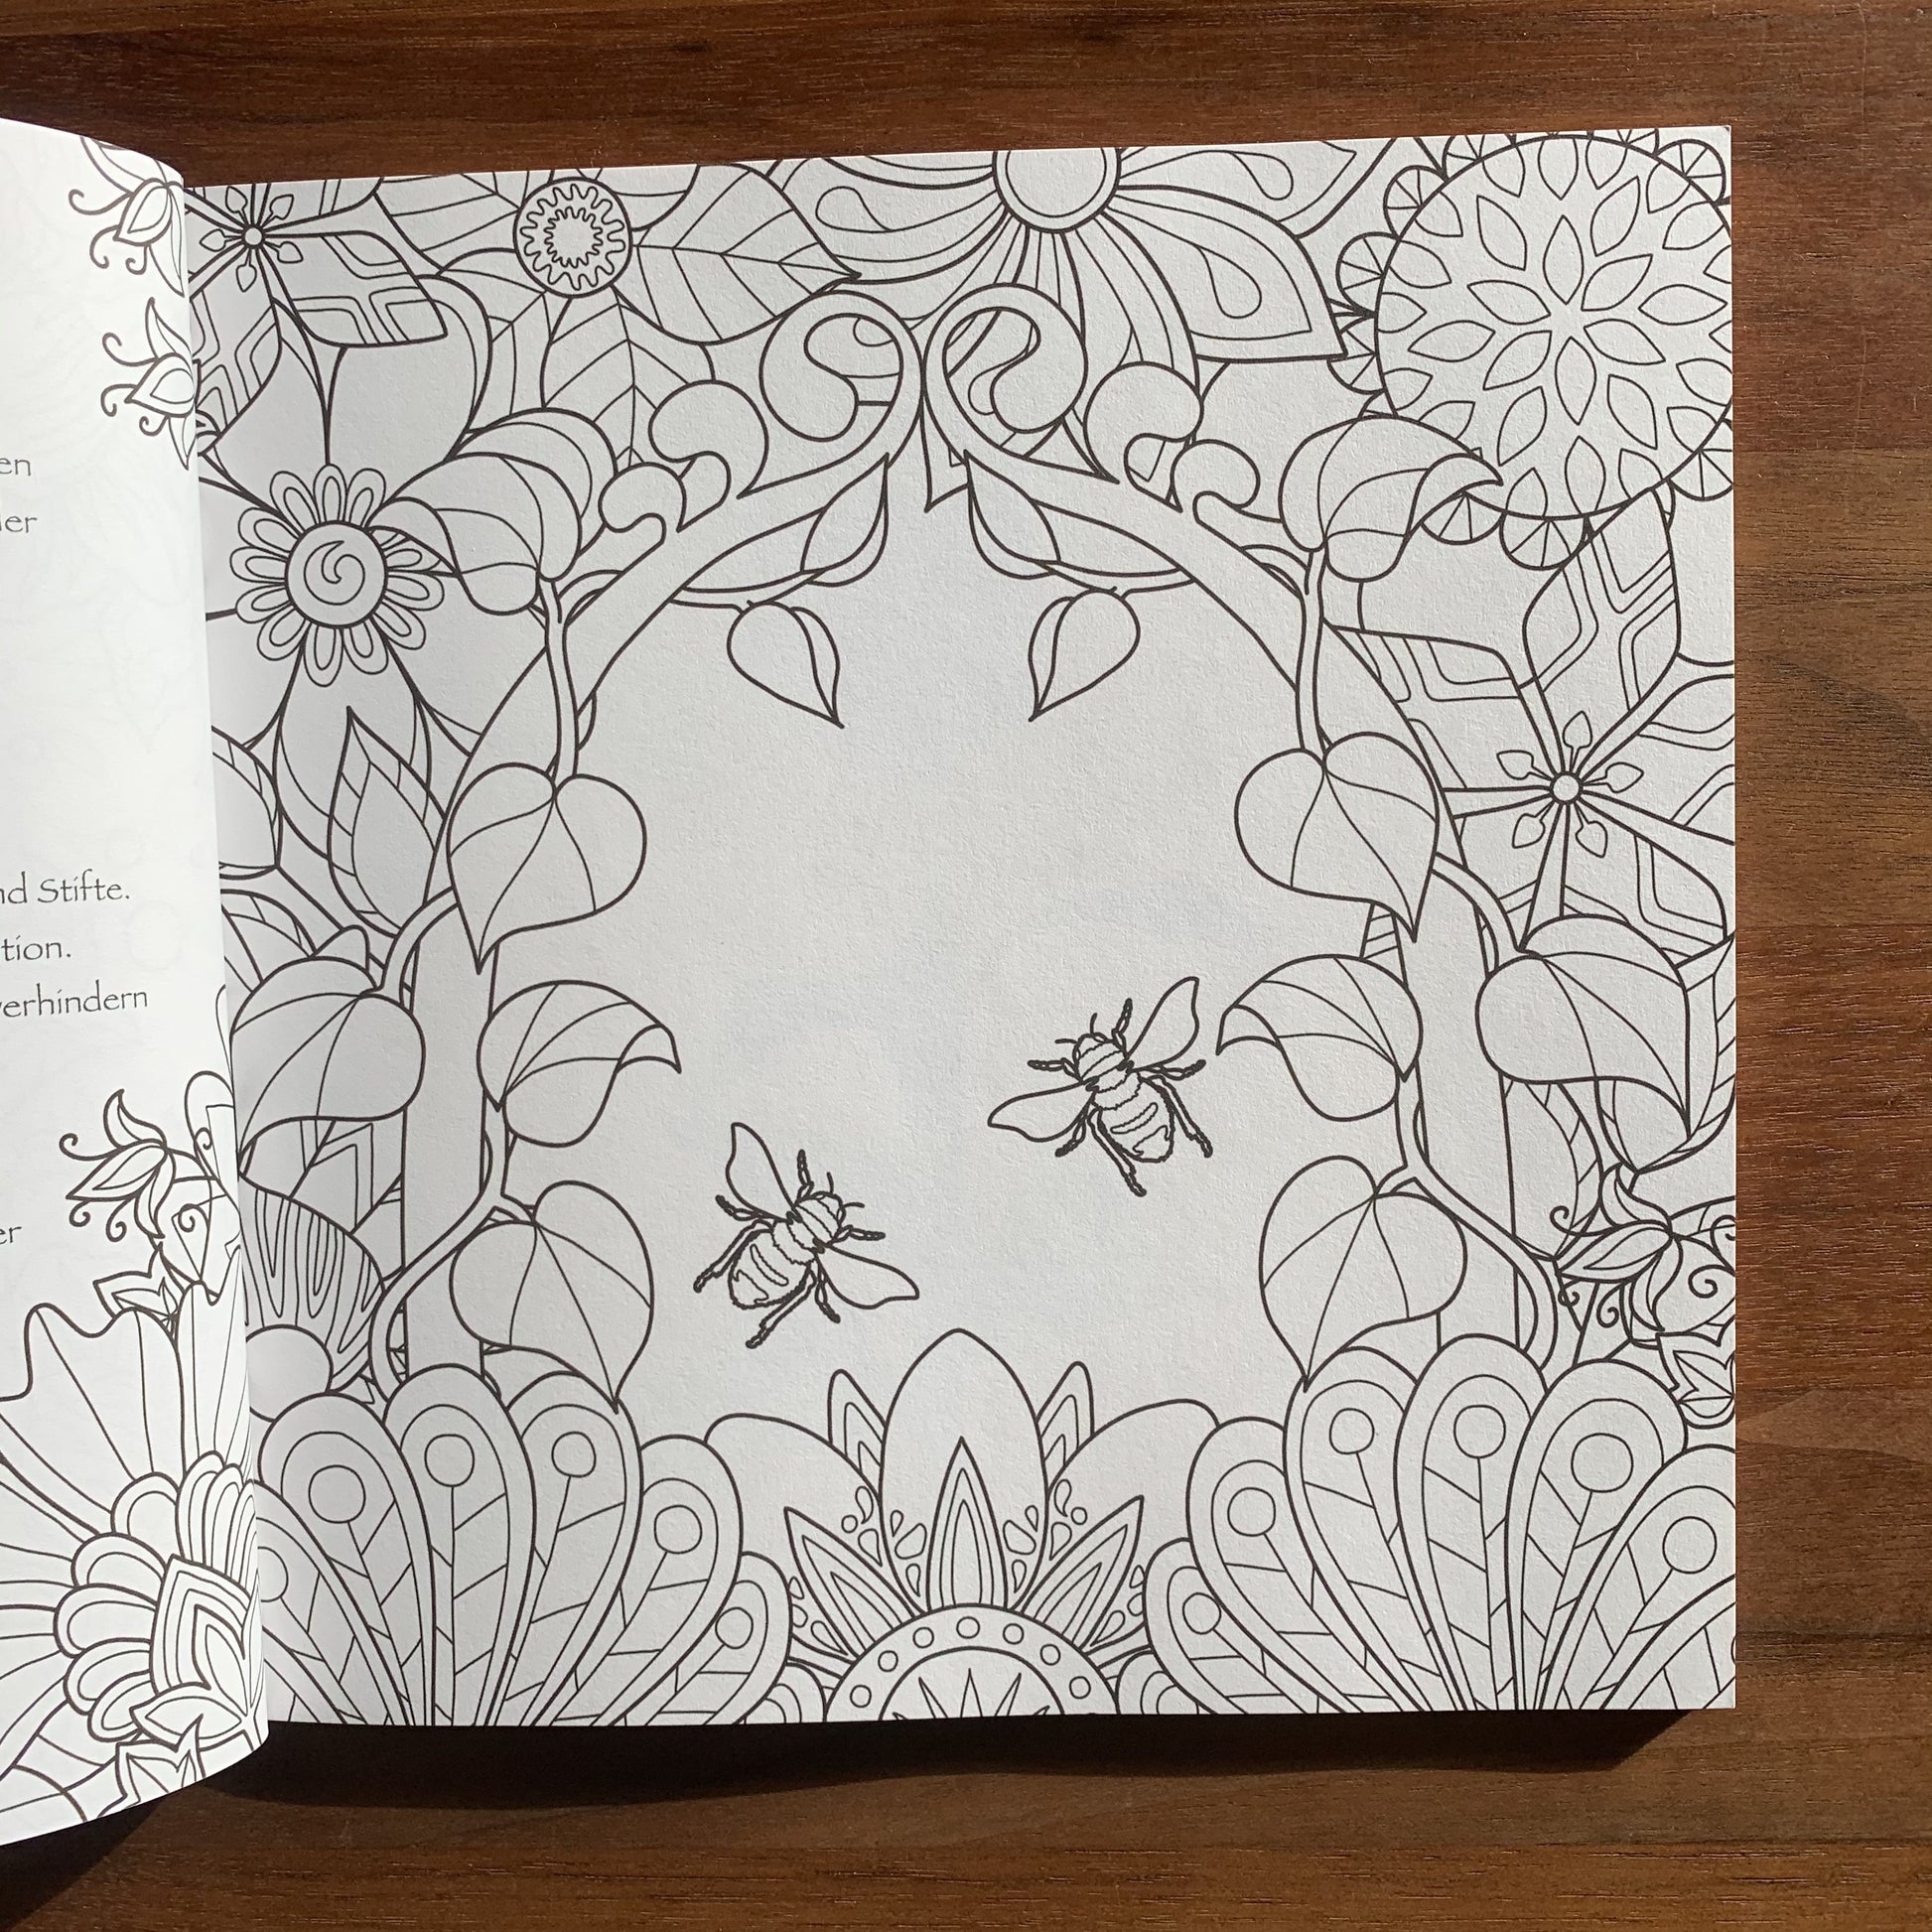 colouring page with flowers and bumble bees